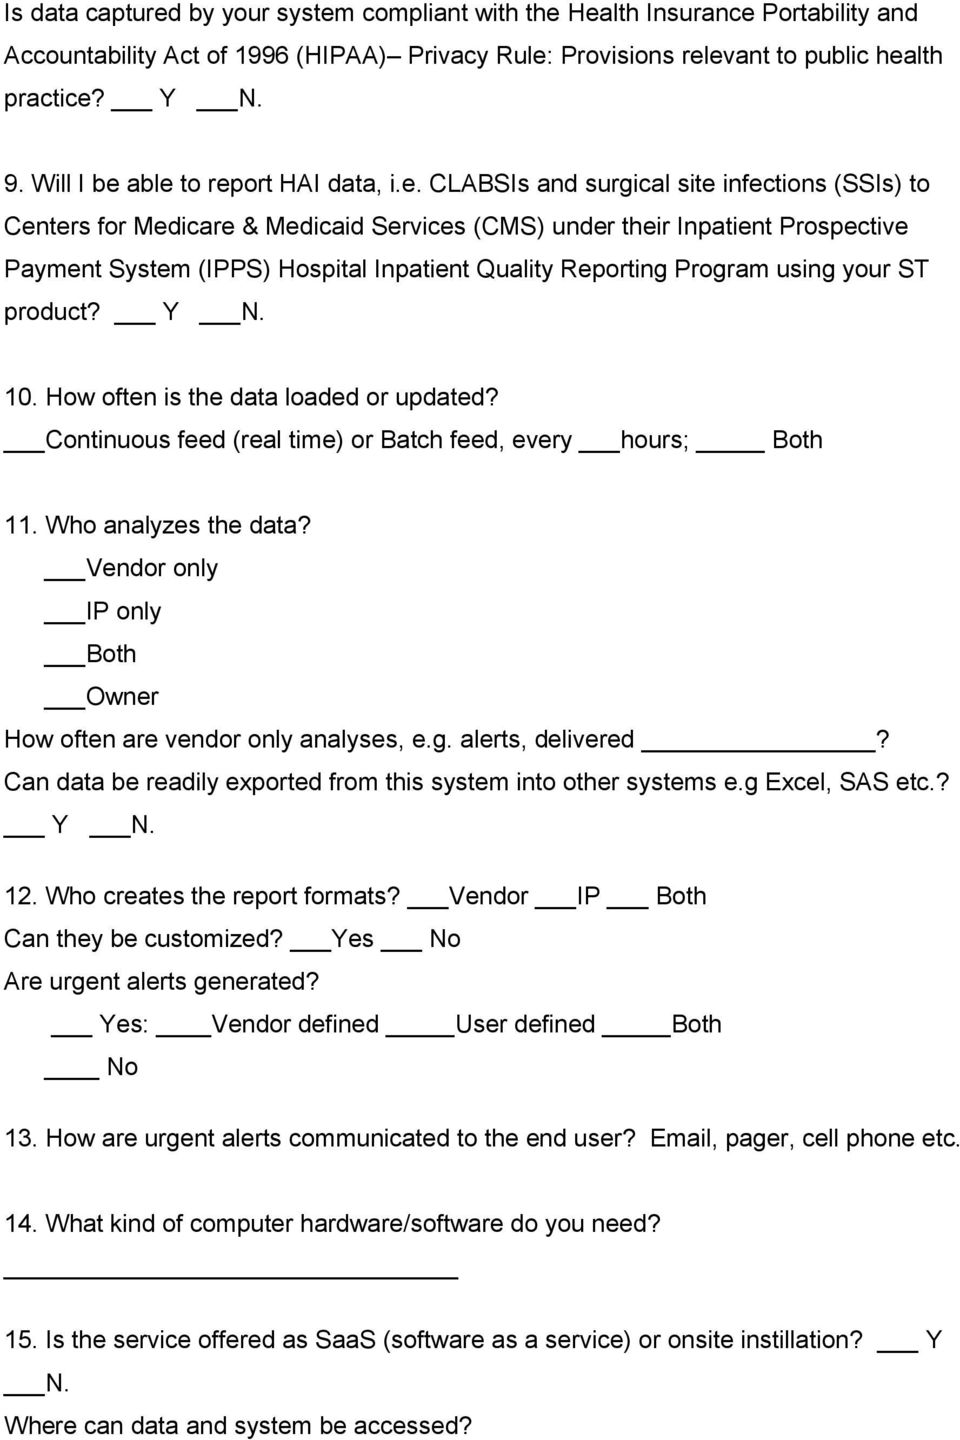 able to report HAI data, i.e. CLABSIs and surgical site infections (SSIs) to Centers for Medicare & Medicaid Services (CMS) under their Inpatient Prospective Payment System (IPPS) Hospital Inpatient